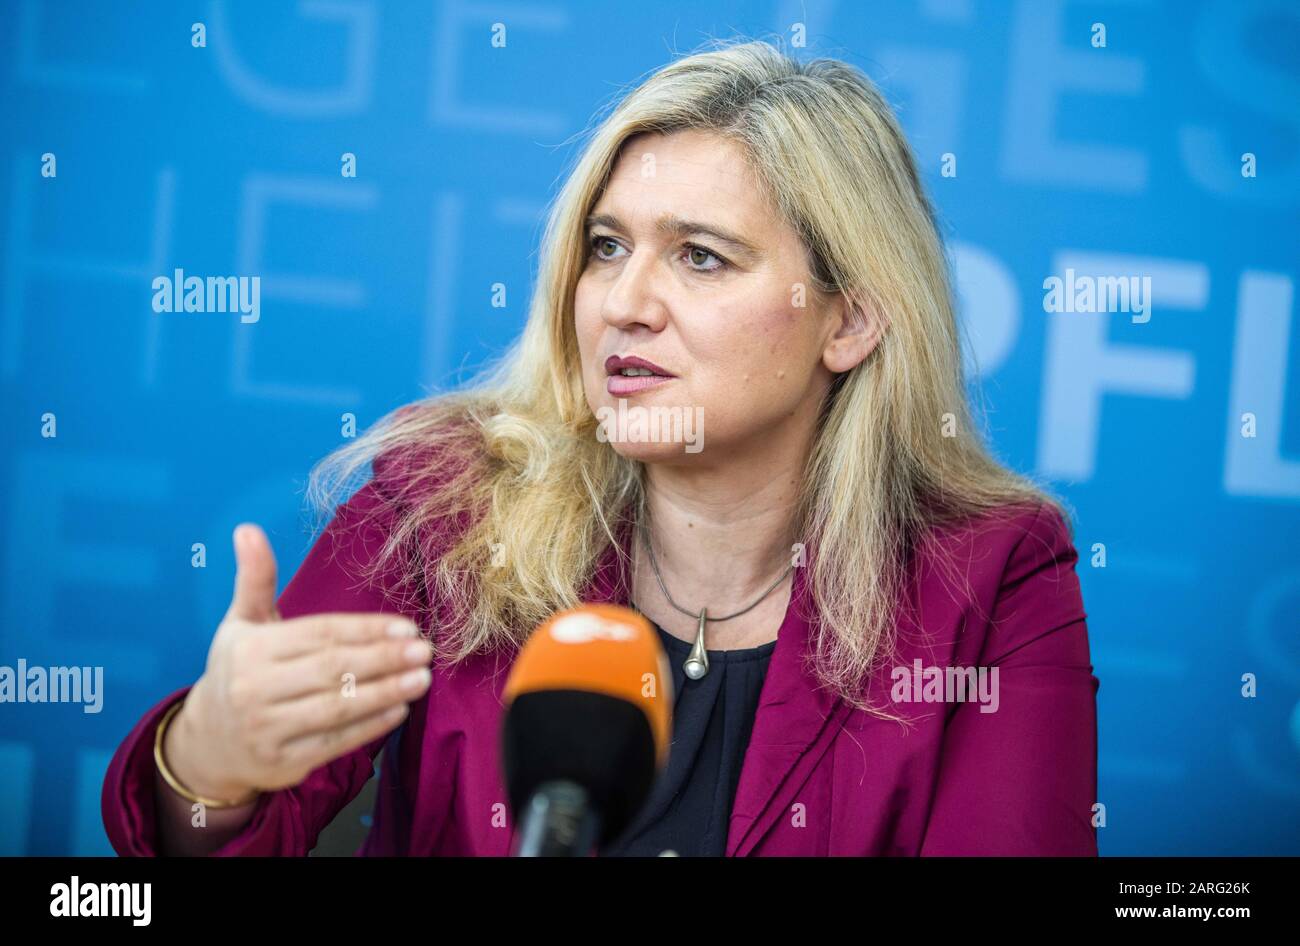 Munich, Bavaria, Germany. 28th Jan, 2020. MELANIE HUML, physician and Minister of the Bavarian Landtag. In connection with the first confirmed case of Corona Virus in Germany, the Bavarian Health Ministry (Bayerisches Staatsministerium fuer Gesundheit und Pflege) held a press conference to discuss the findings. The virus was found in the wealthy Lake Starnberg area, just outside of western Munich, which is also connected to the citiy via its S-Bahn network. The affected is a 33 year old from Landsberg, who works at a firm in Starnberg recently had contact with a Chinese employee in Germany Stock Photo